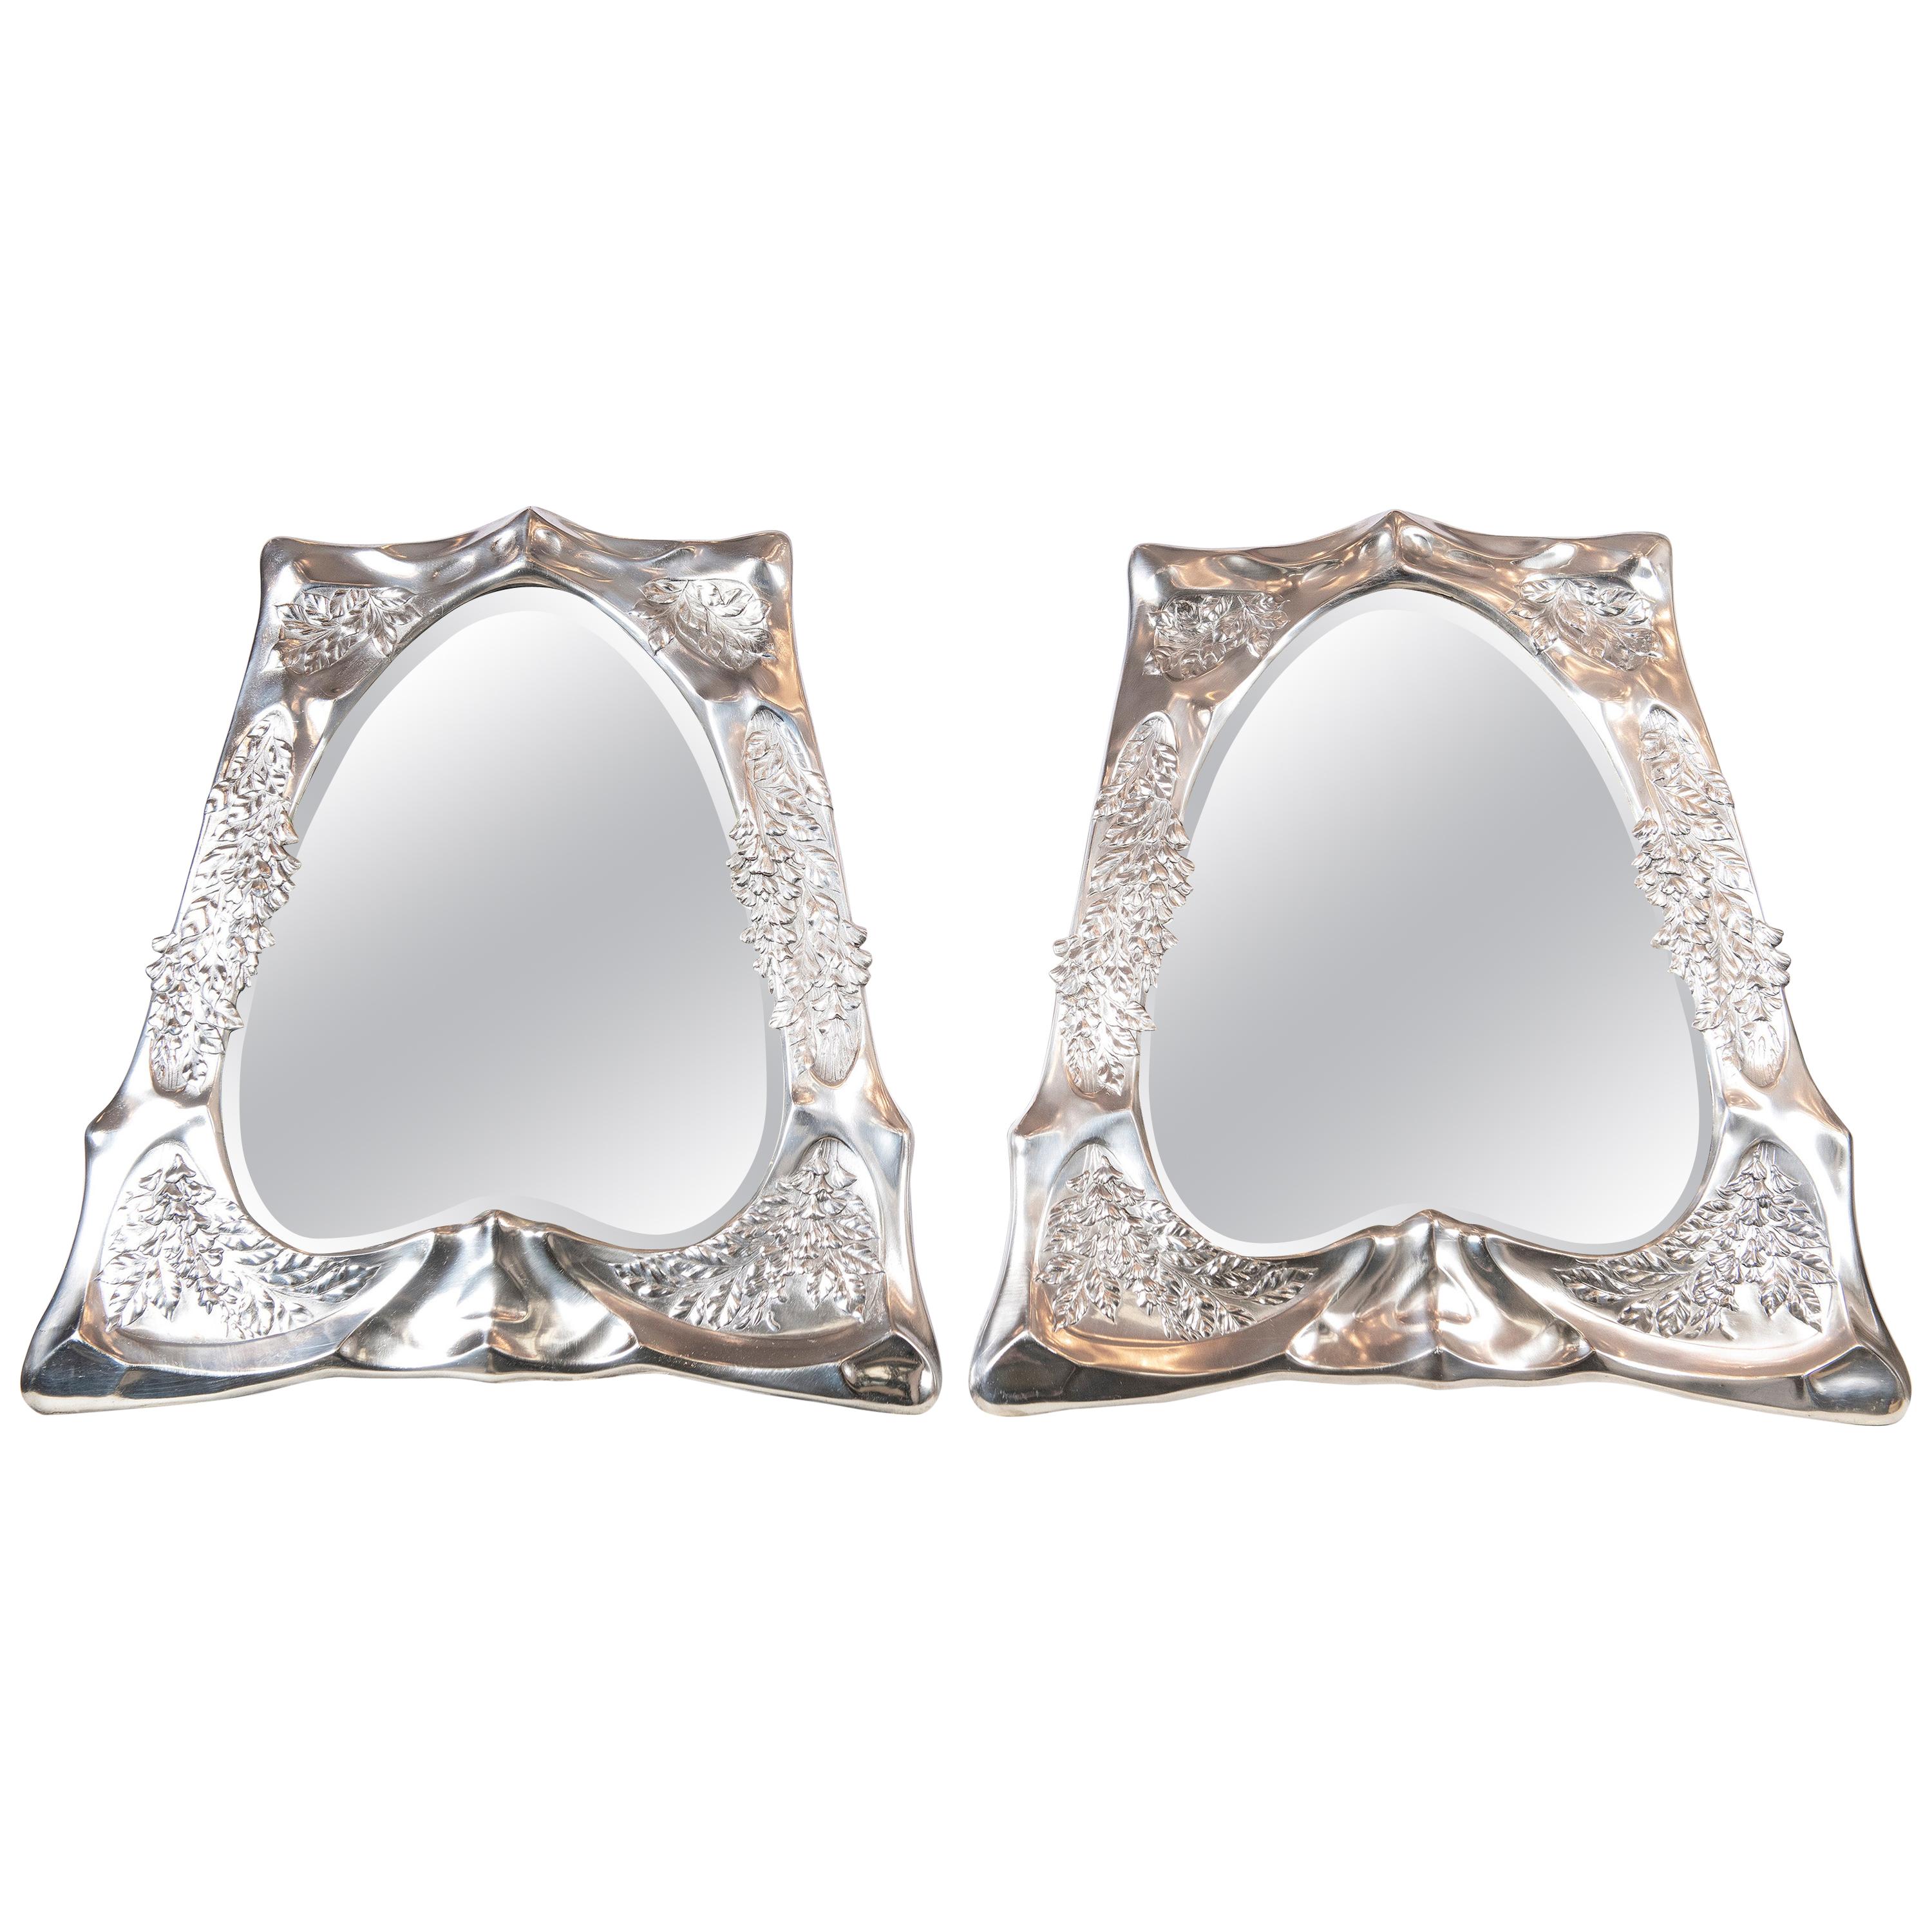 Pair of W.M.F. Silver Plate Mirrors, Jugendnstil Period, Germany, circa 1900